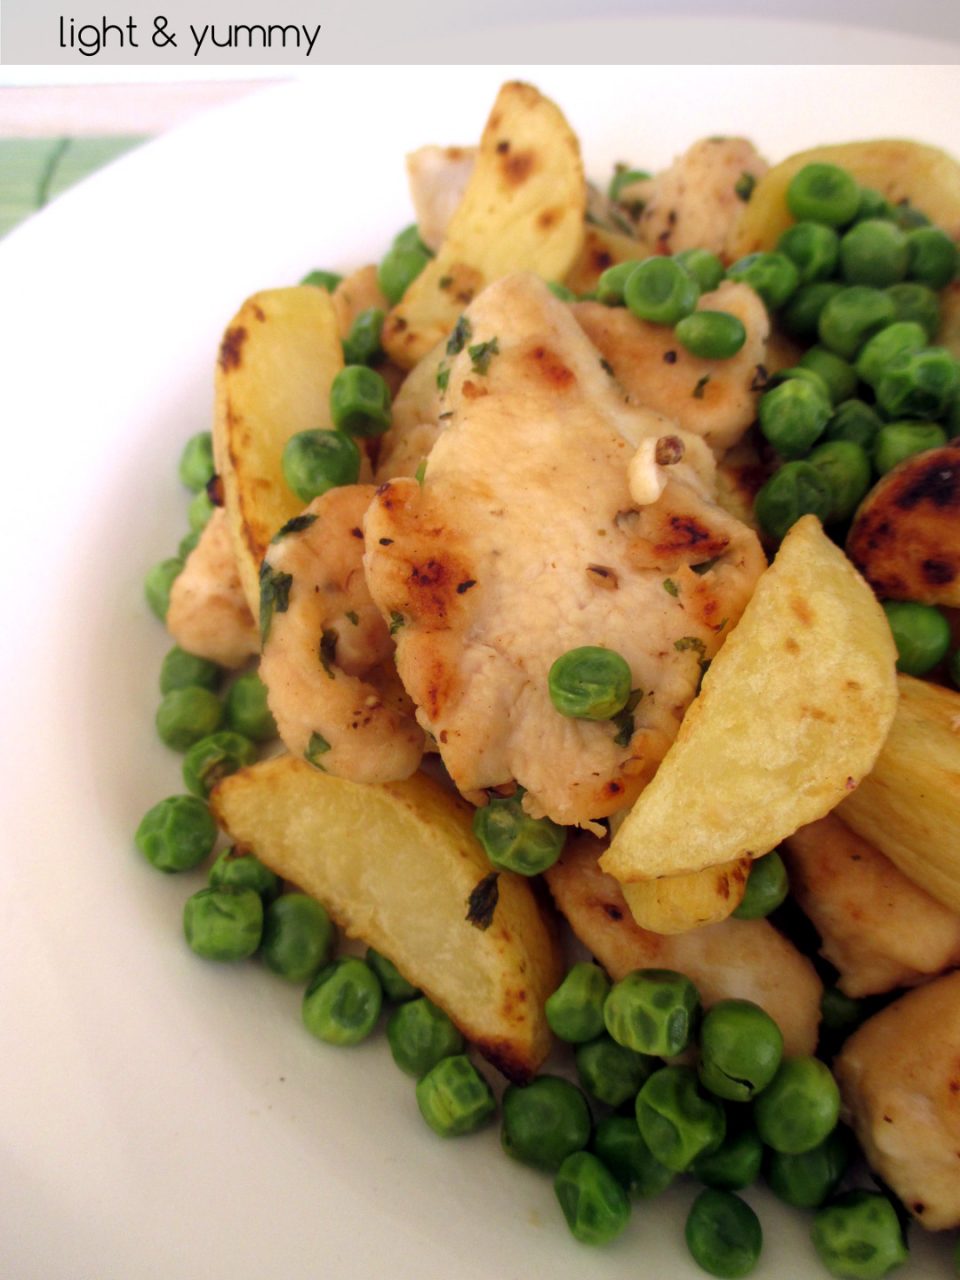 Pan cooked chicken with potatoes and peas, Light & Yummy